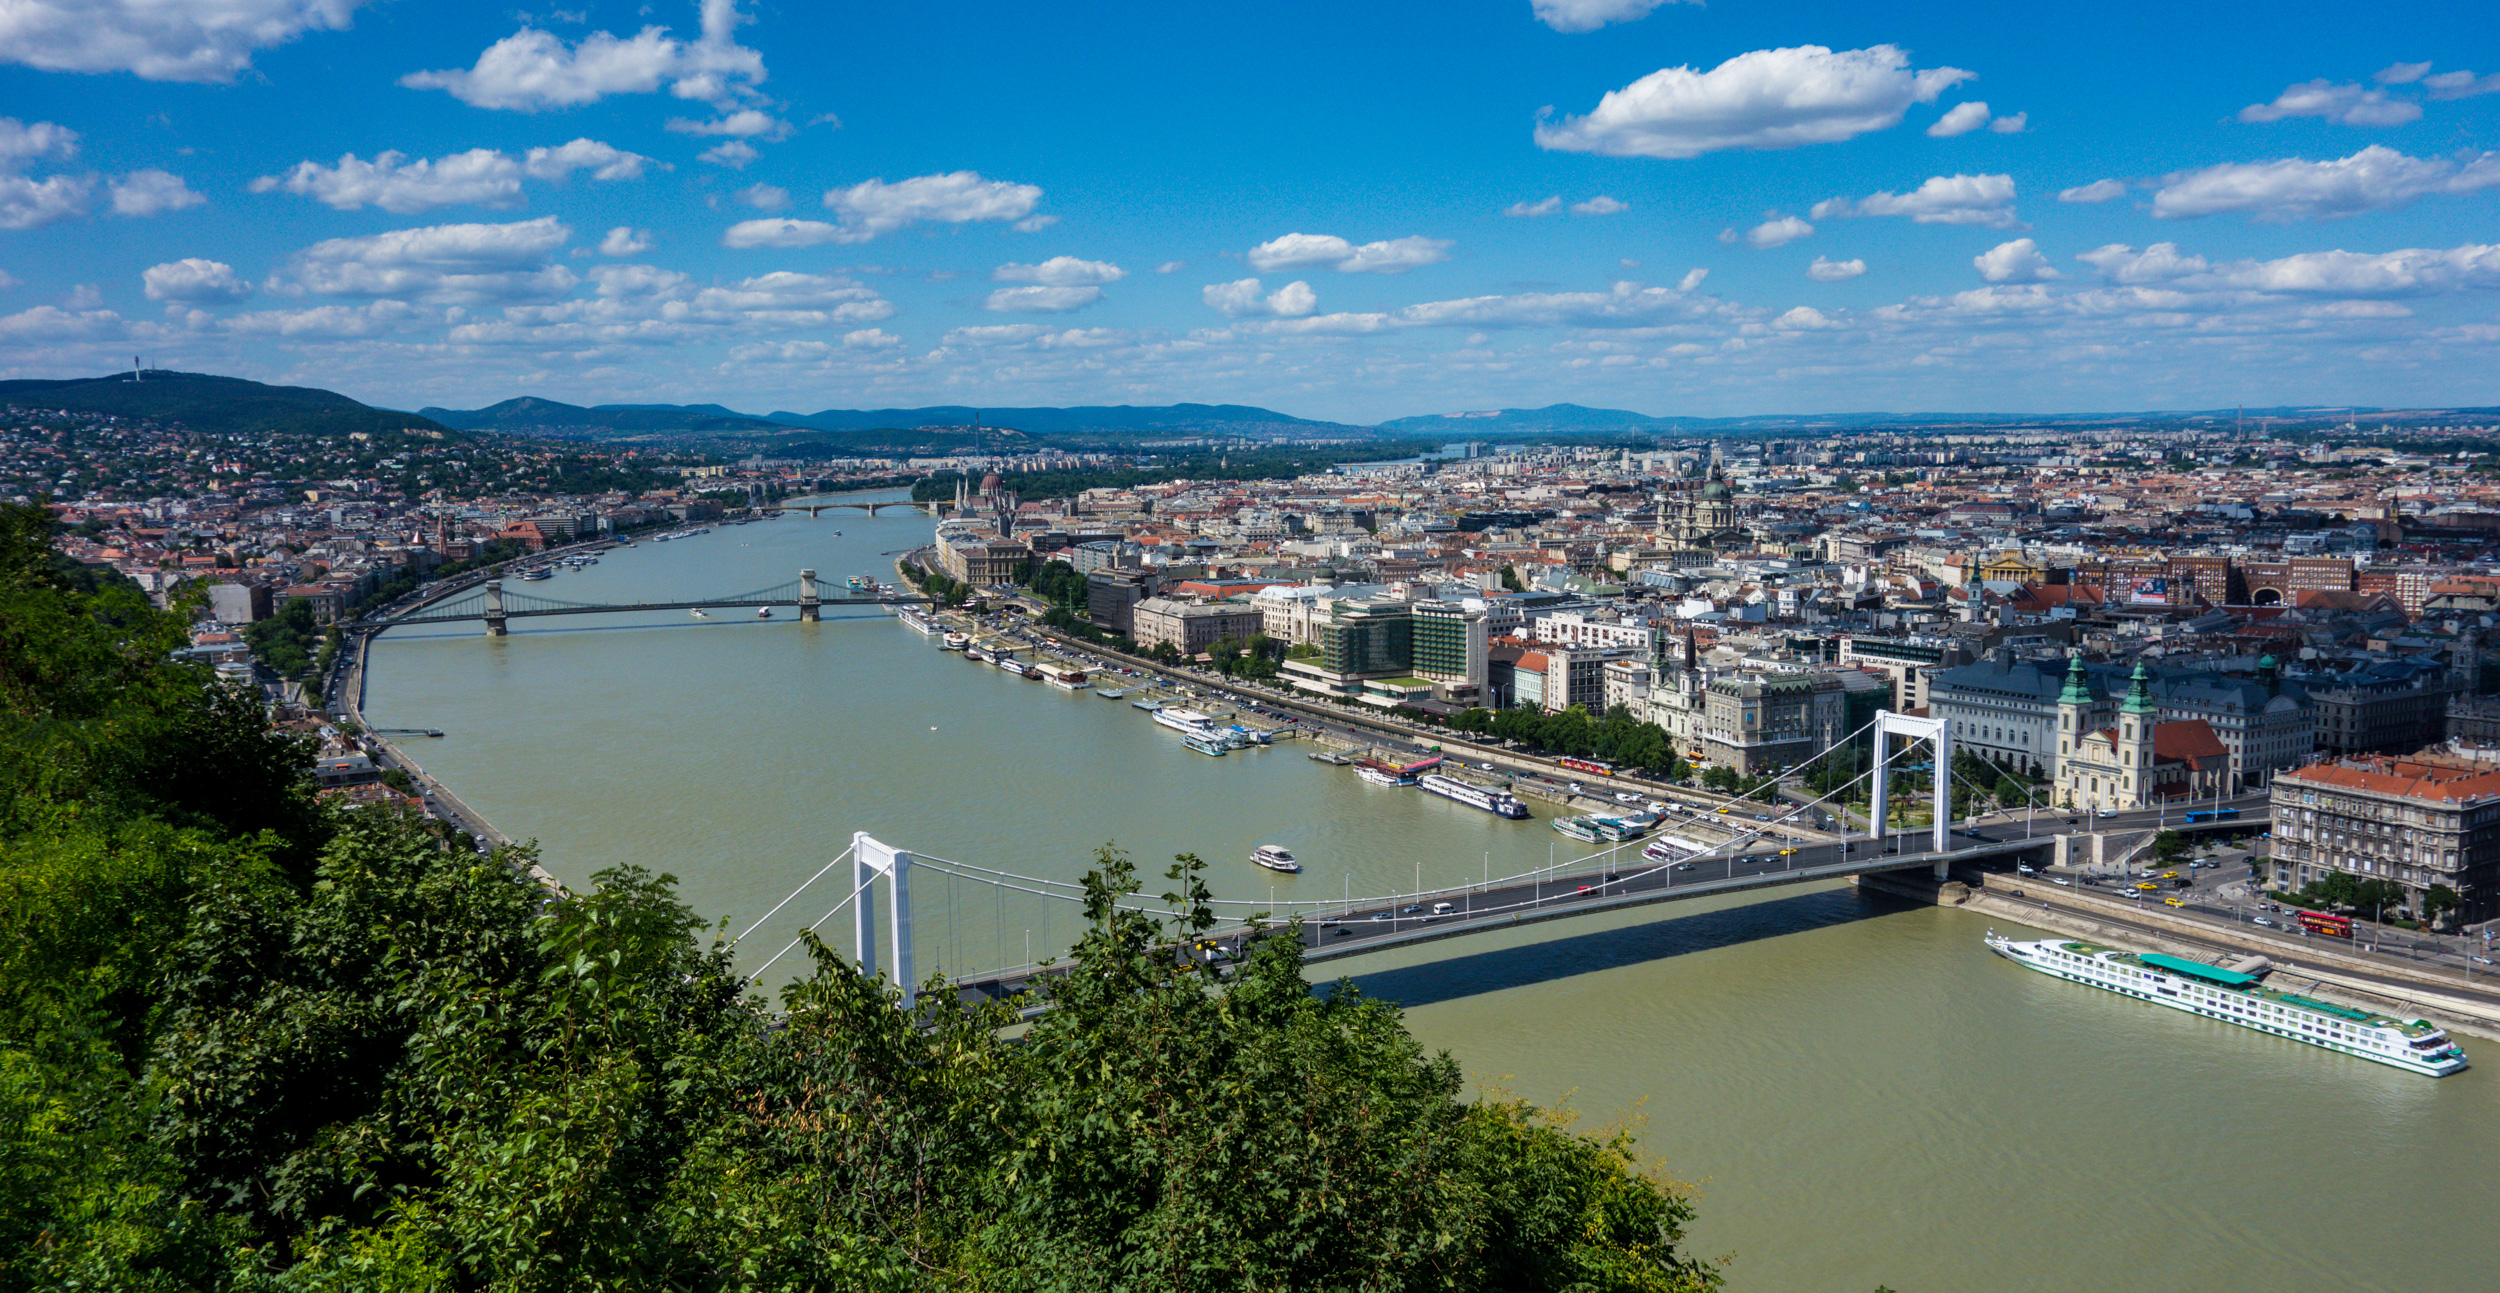 View from Gellert Hill to the Danube, Hungary - Budapest